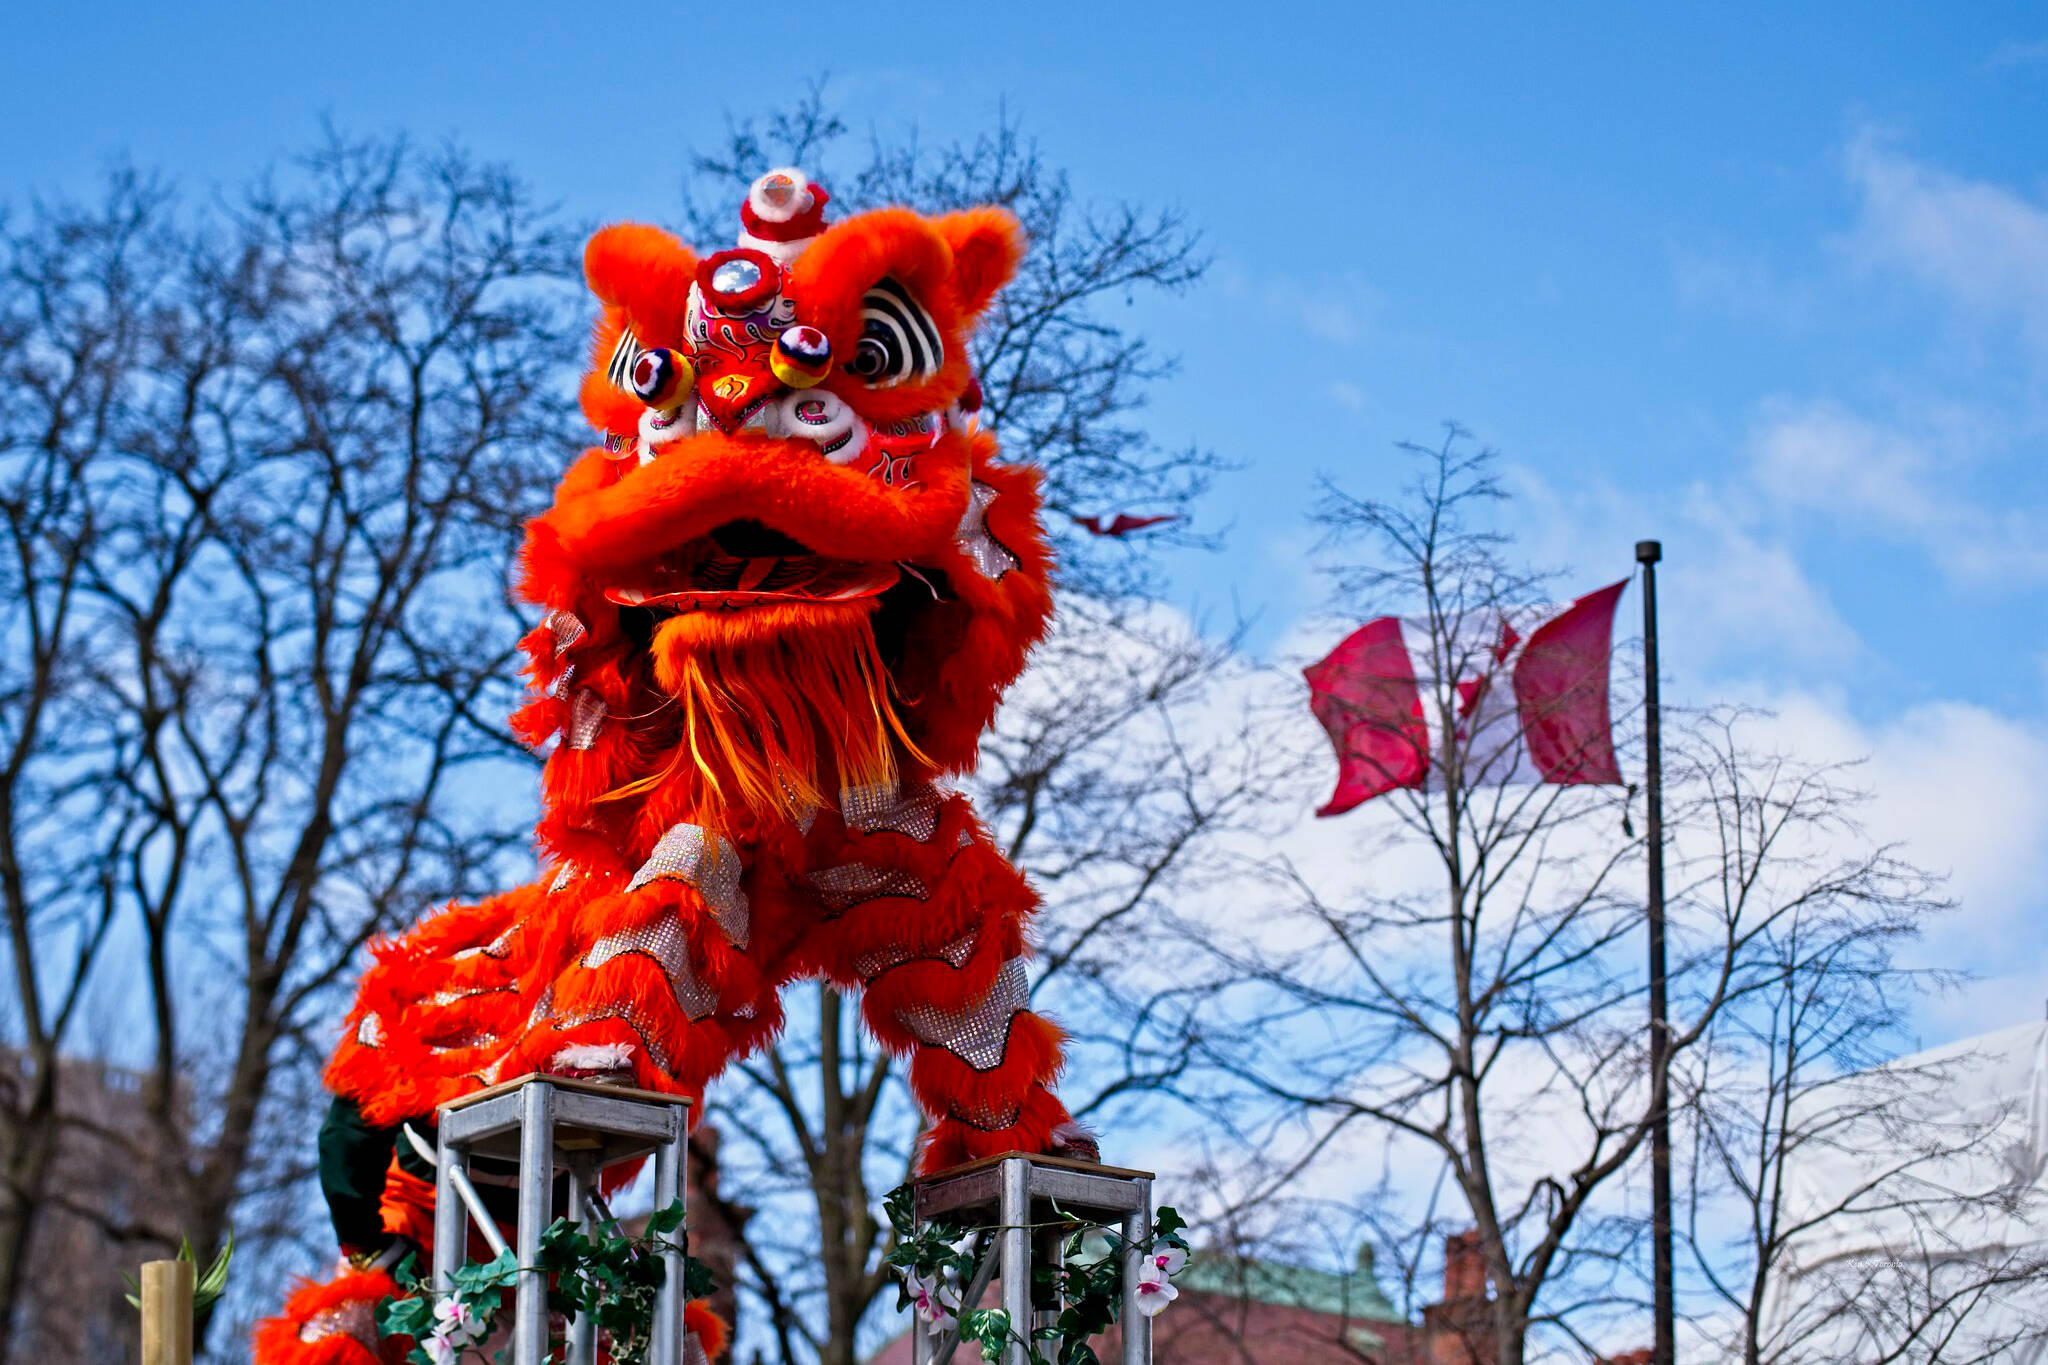 Toronto is getting a massive festival to celebrate the Lunar New Year